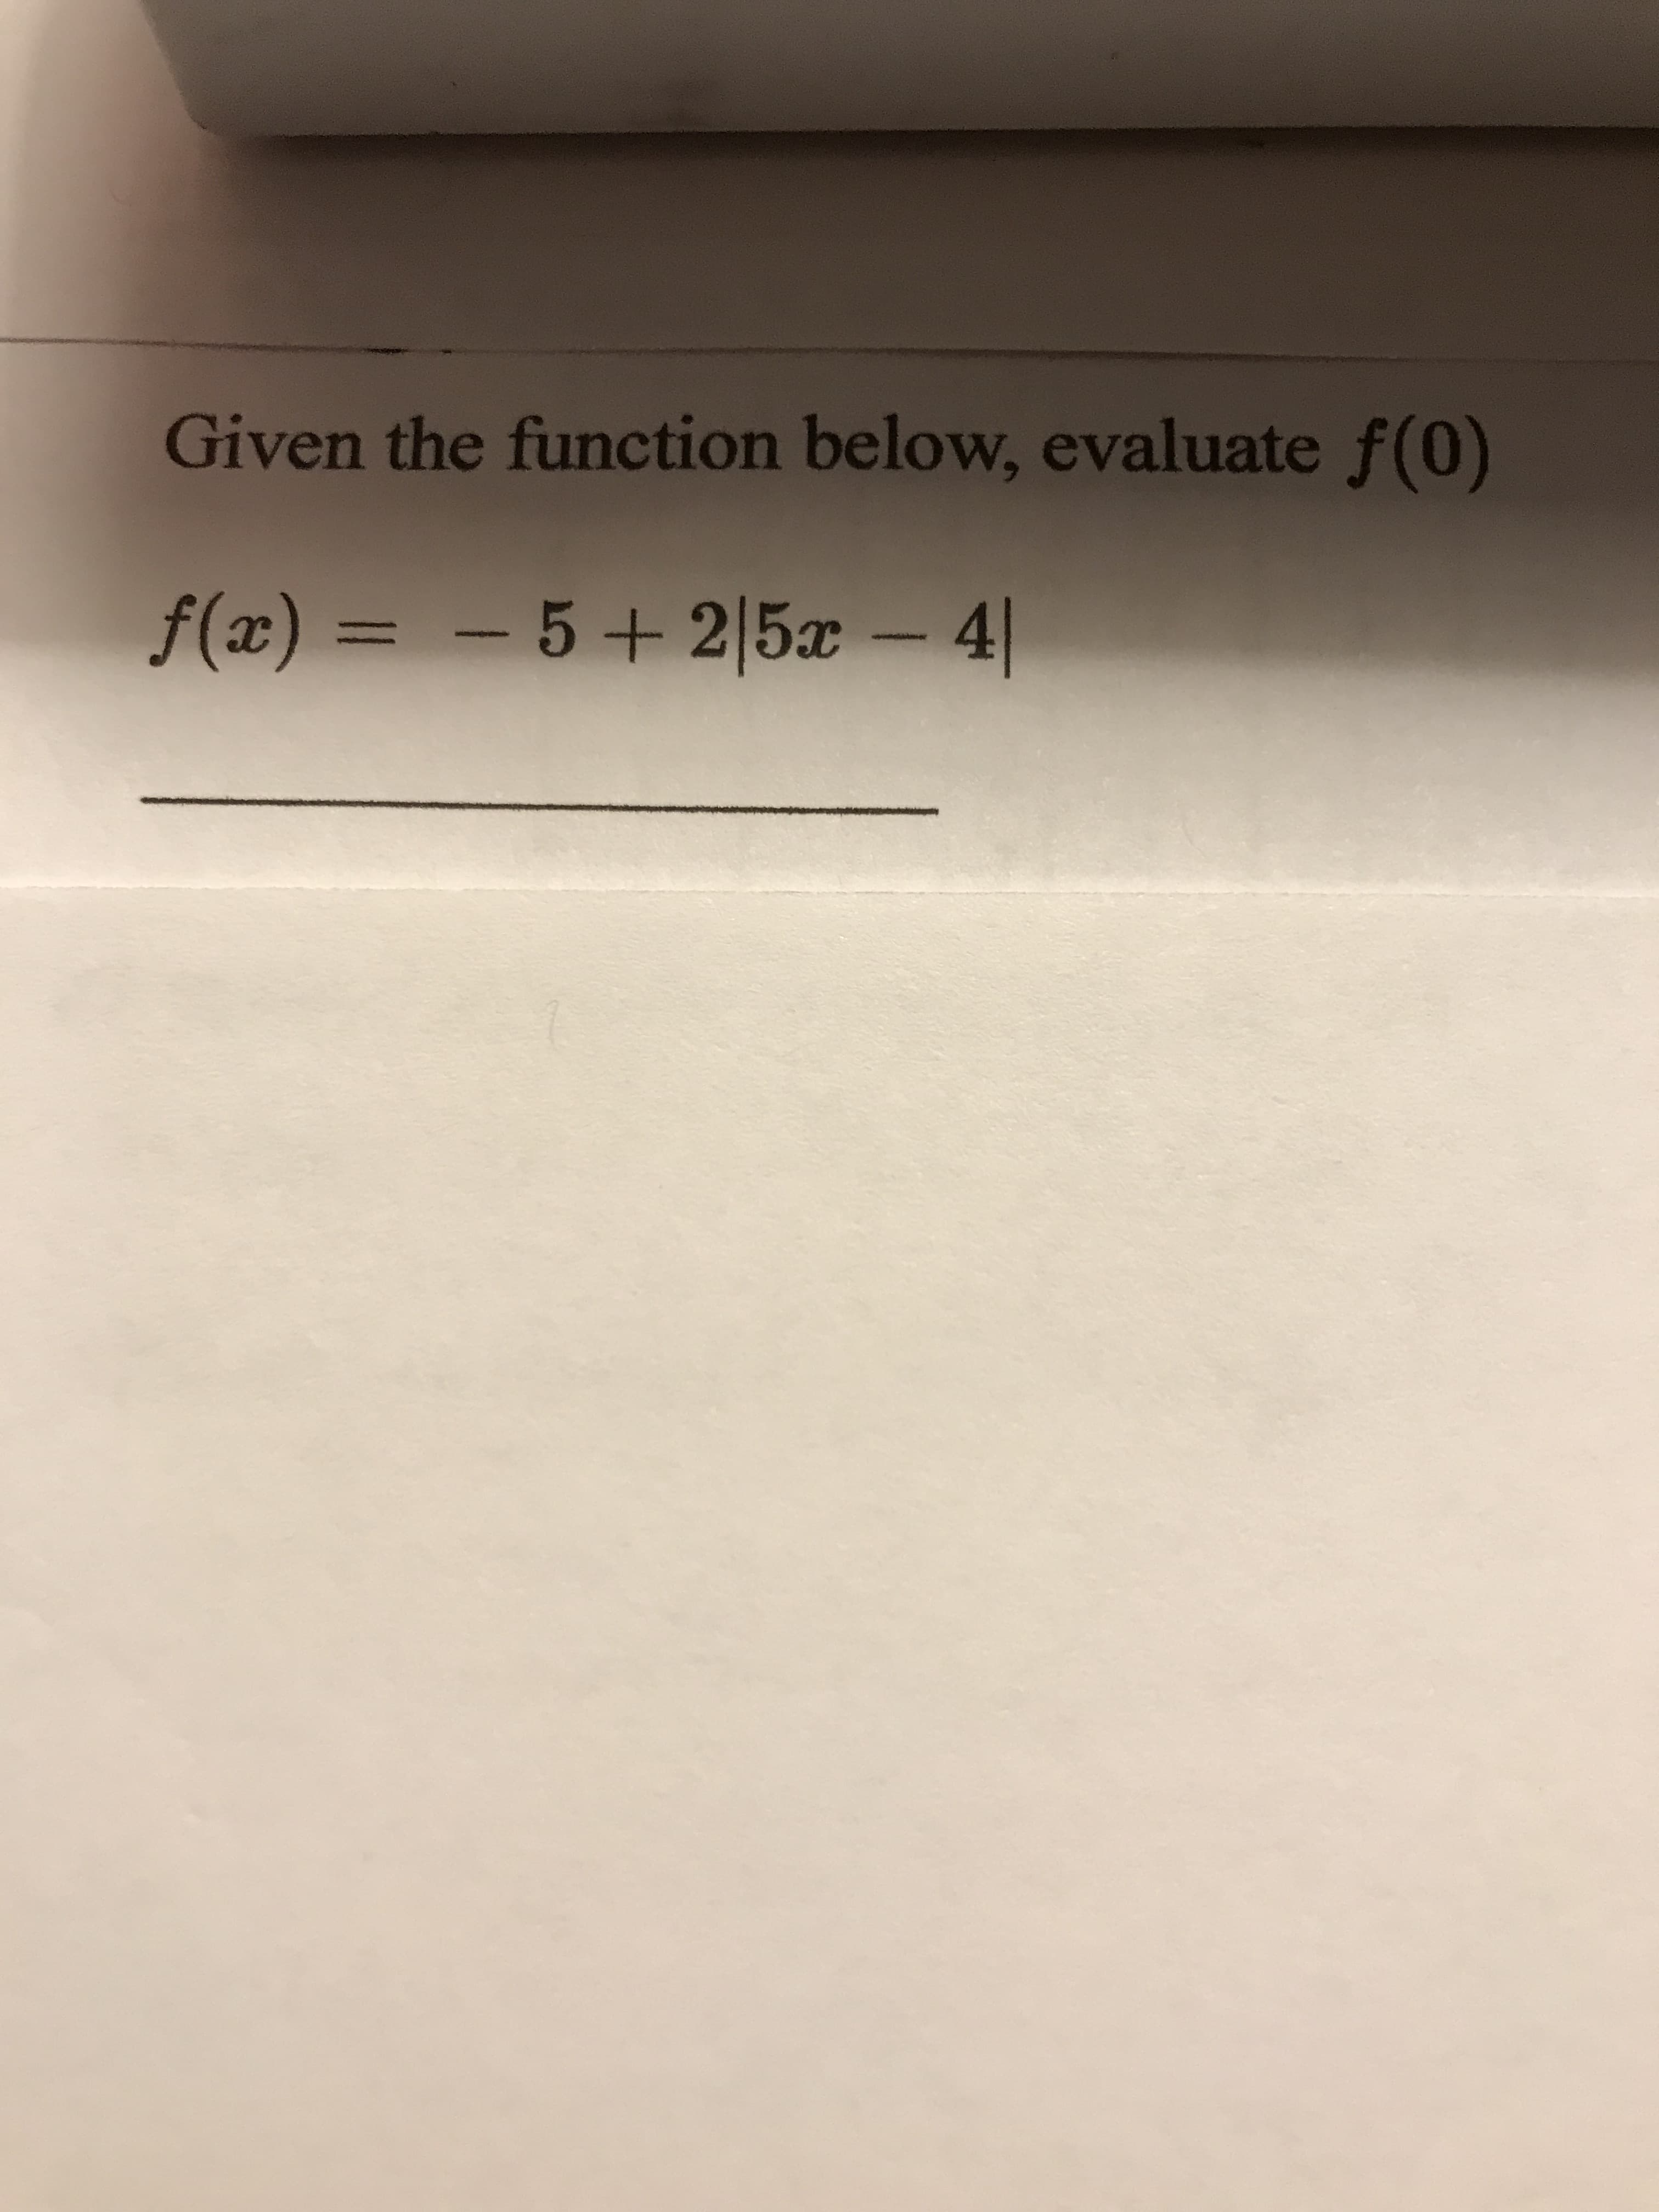 Given the function below, evaluate f(0)
f(x) = – - 4|
5+ 2 5x
